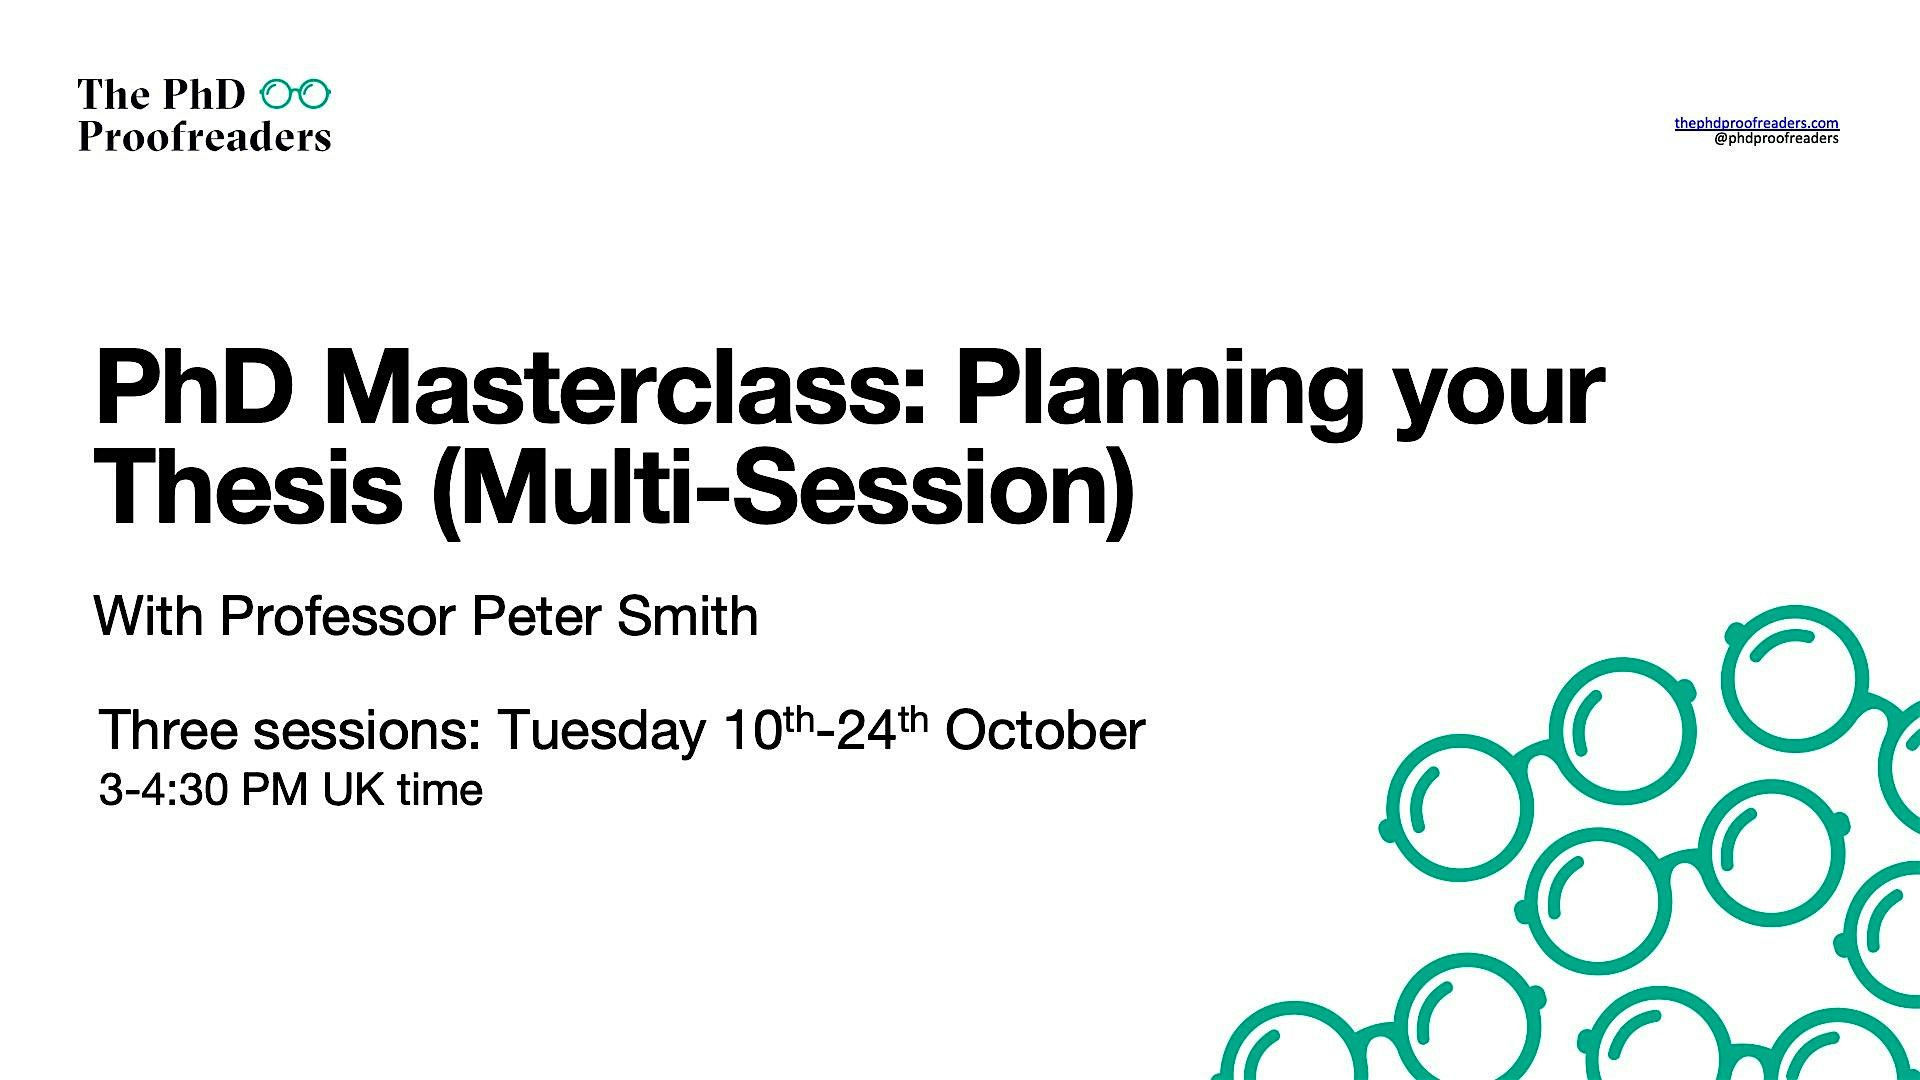 PhD Masterclass: Planning Your Thesis (Multi-Session)